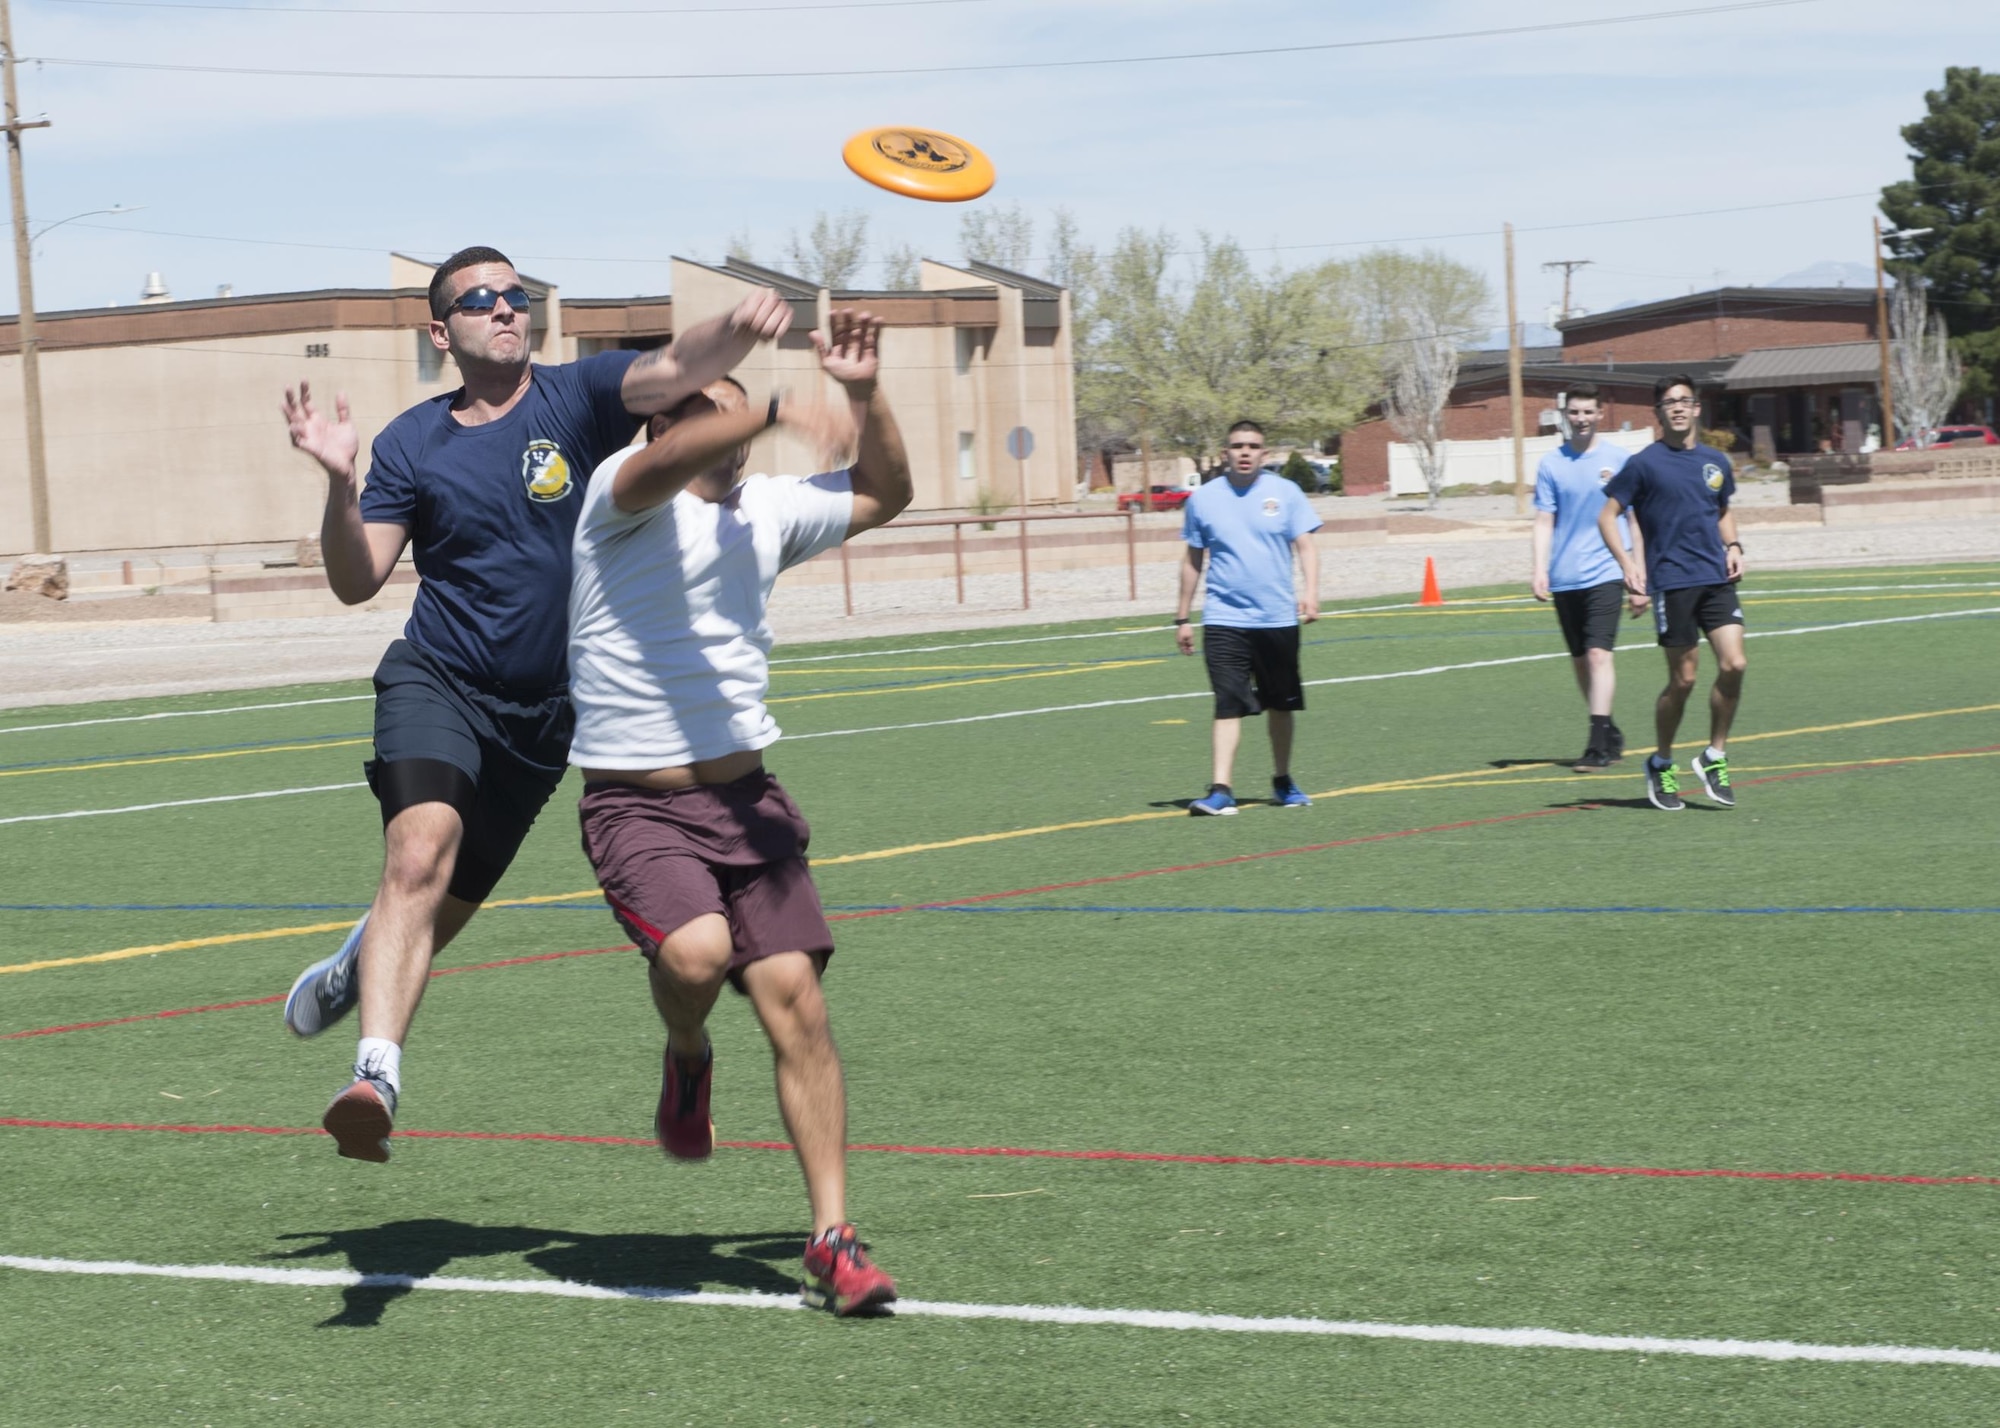 Airmen play a game of ultimate Frisbee during the 49th Wing Sports Day, March 17, 2017 at Holloman Air Force Base, N.M. During Sports Day, squadrons showed their pride and camaraderie during sports such as football, ultimate Frisbee, softball and many more. (U.S. Air Force photo by Senior Airman Emily Kenney)